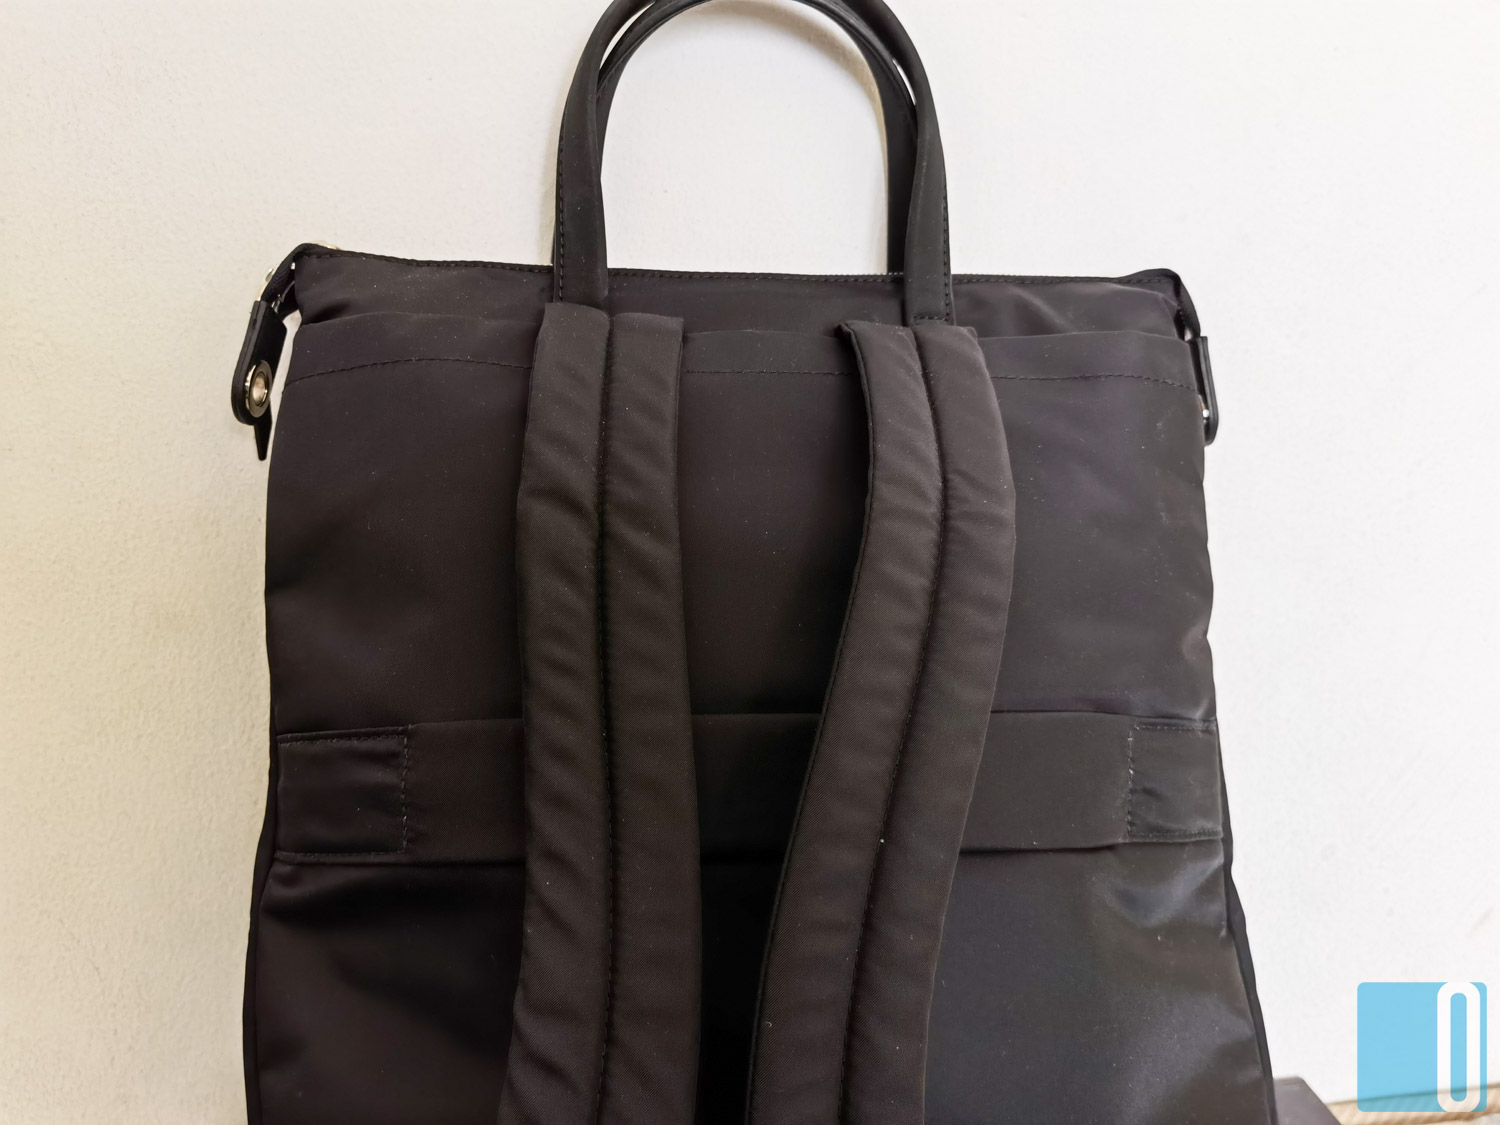 Targus Newport Convertible Backpack/Tote Review - Slim And Fashionable